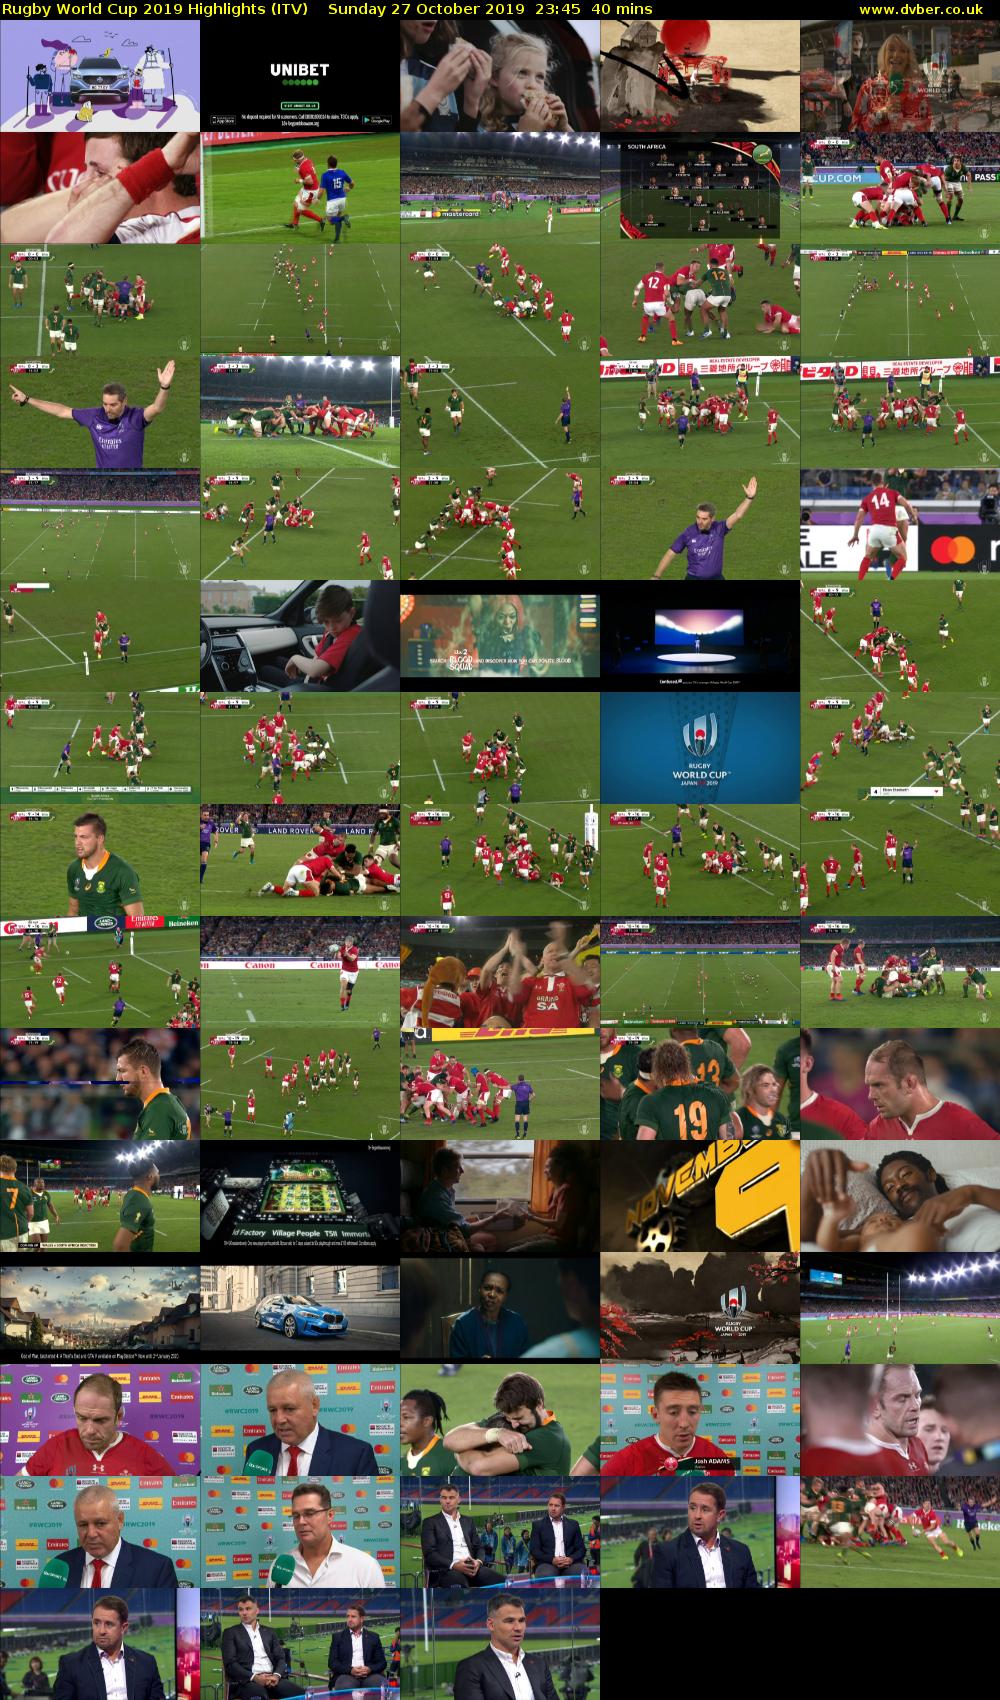 Rugby World Cup 2019 Highlights (ITV) Sunday 27 October 2019 23:45 - 00:25